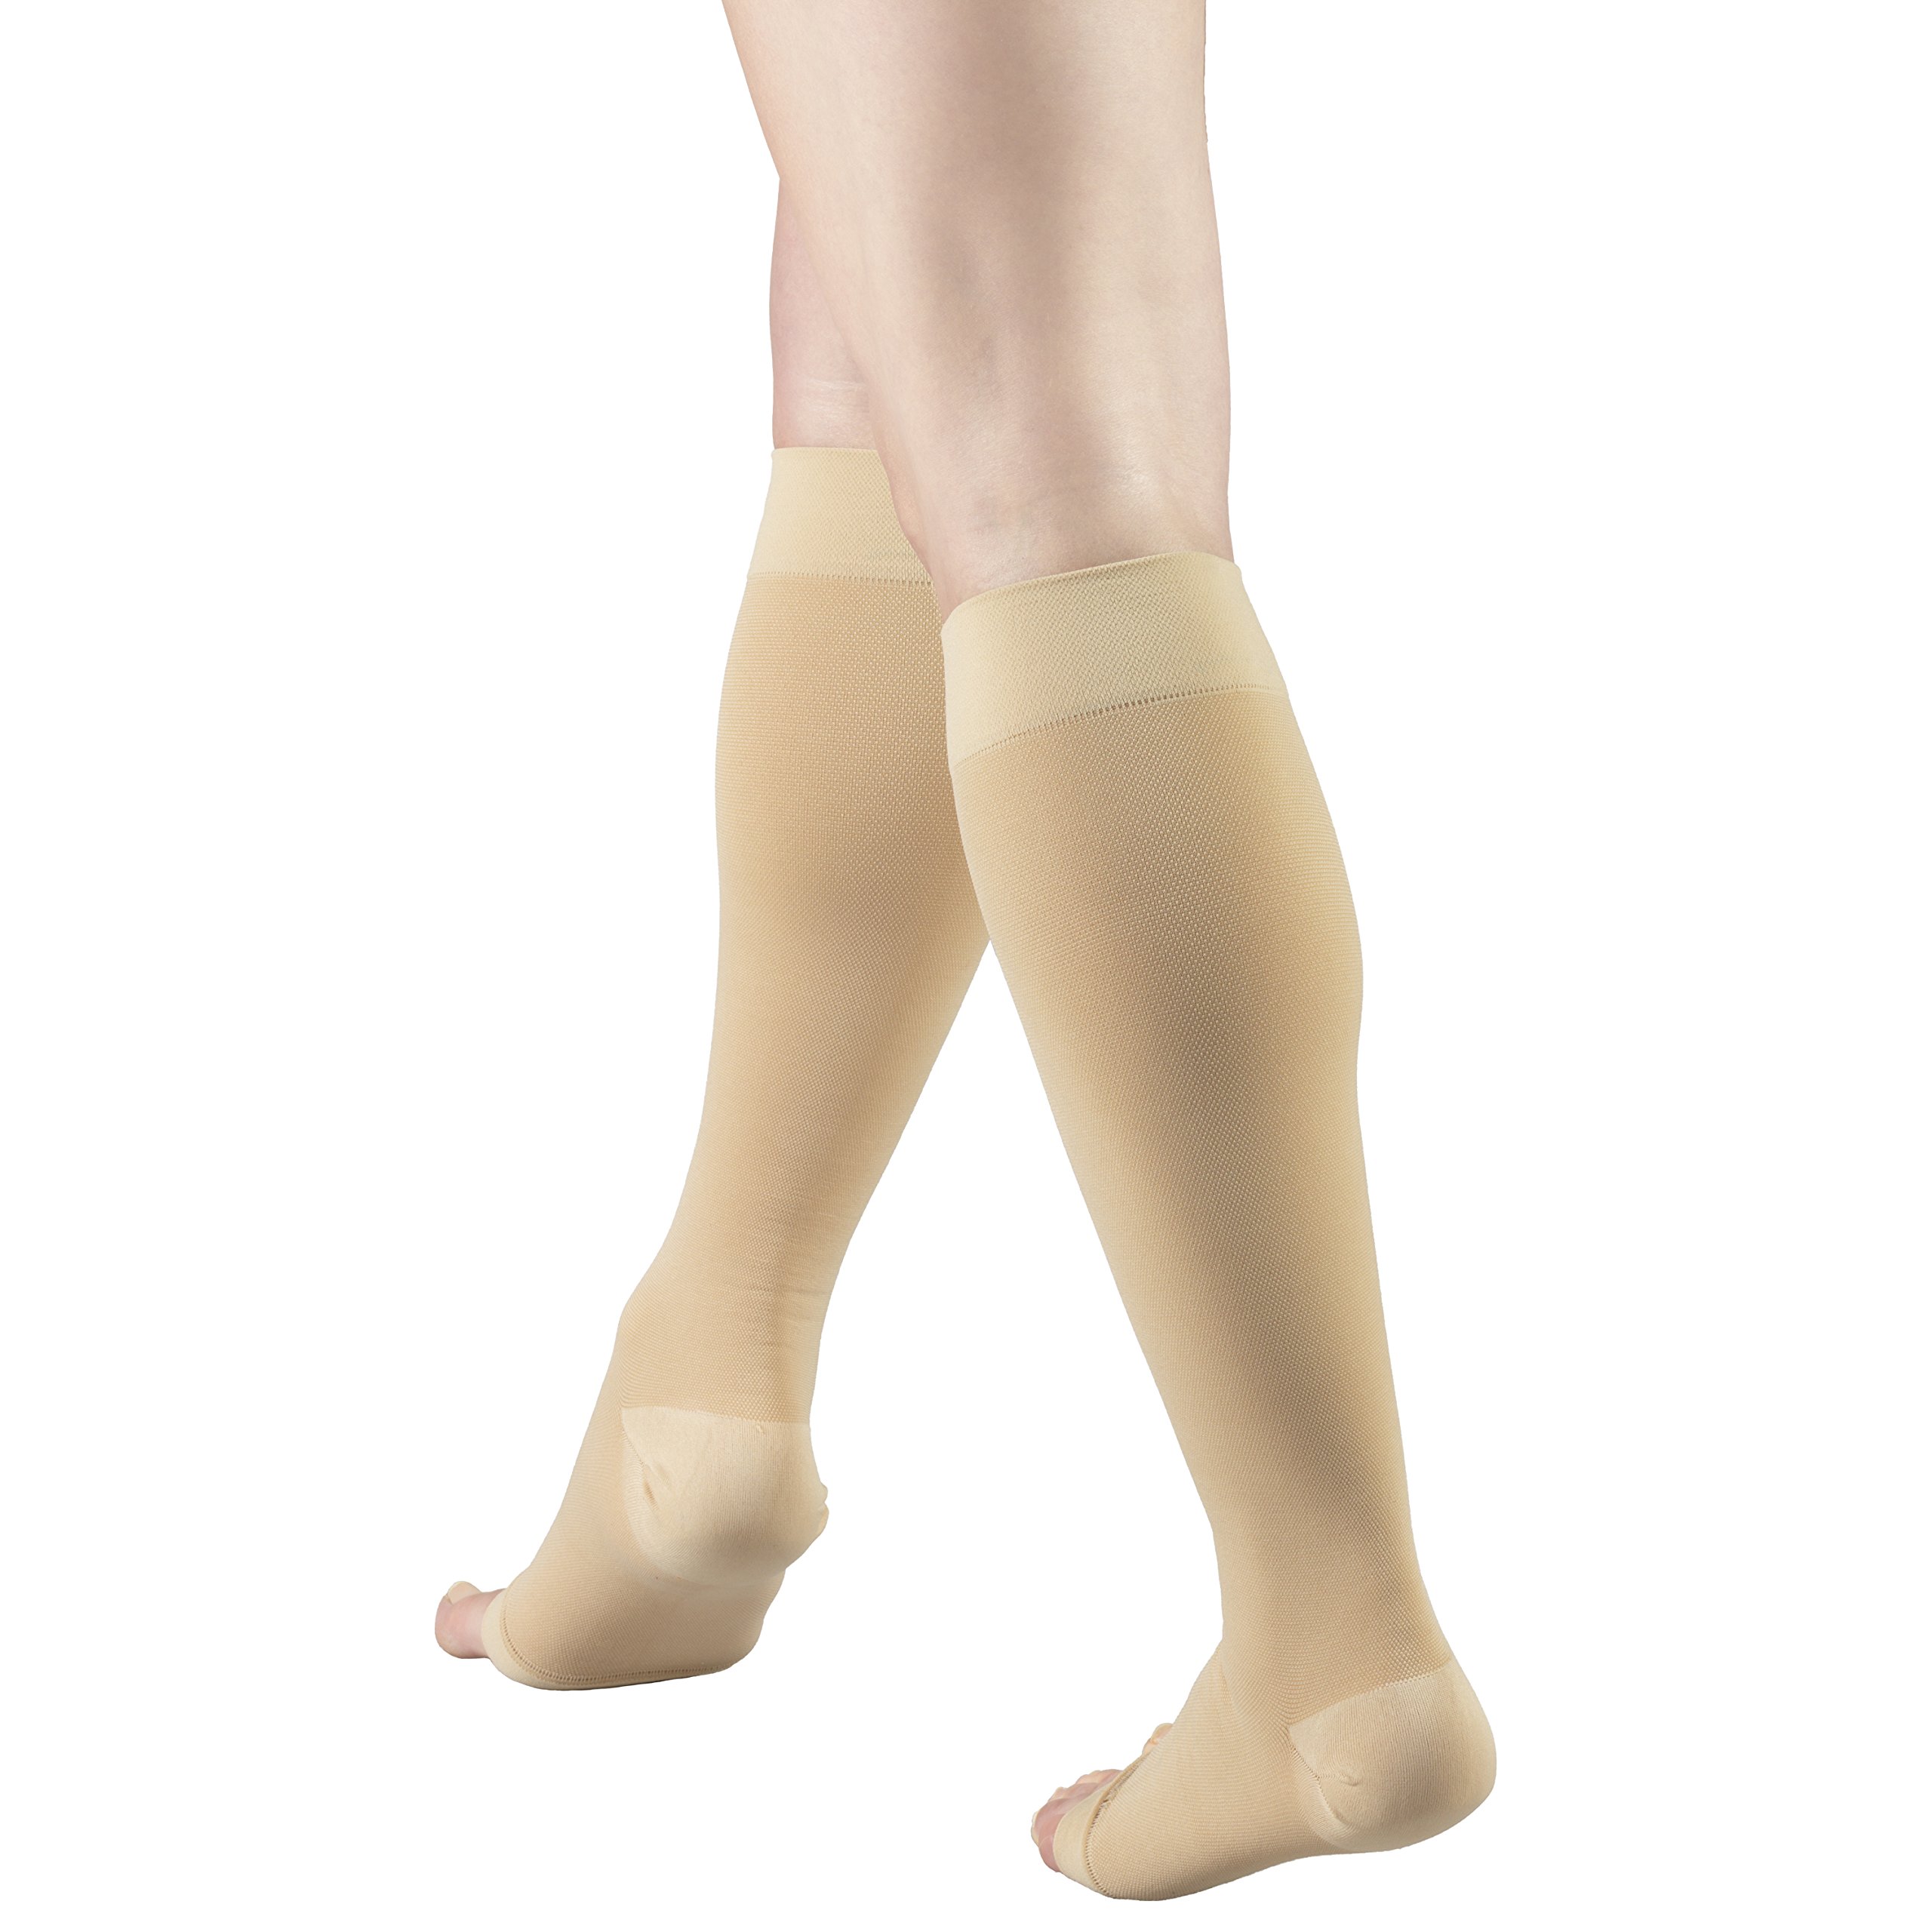 Truform 20-30 mmHg Compression Stockings for Men and Women, Knee High Length, Open Toe, Beige, Large